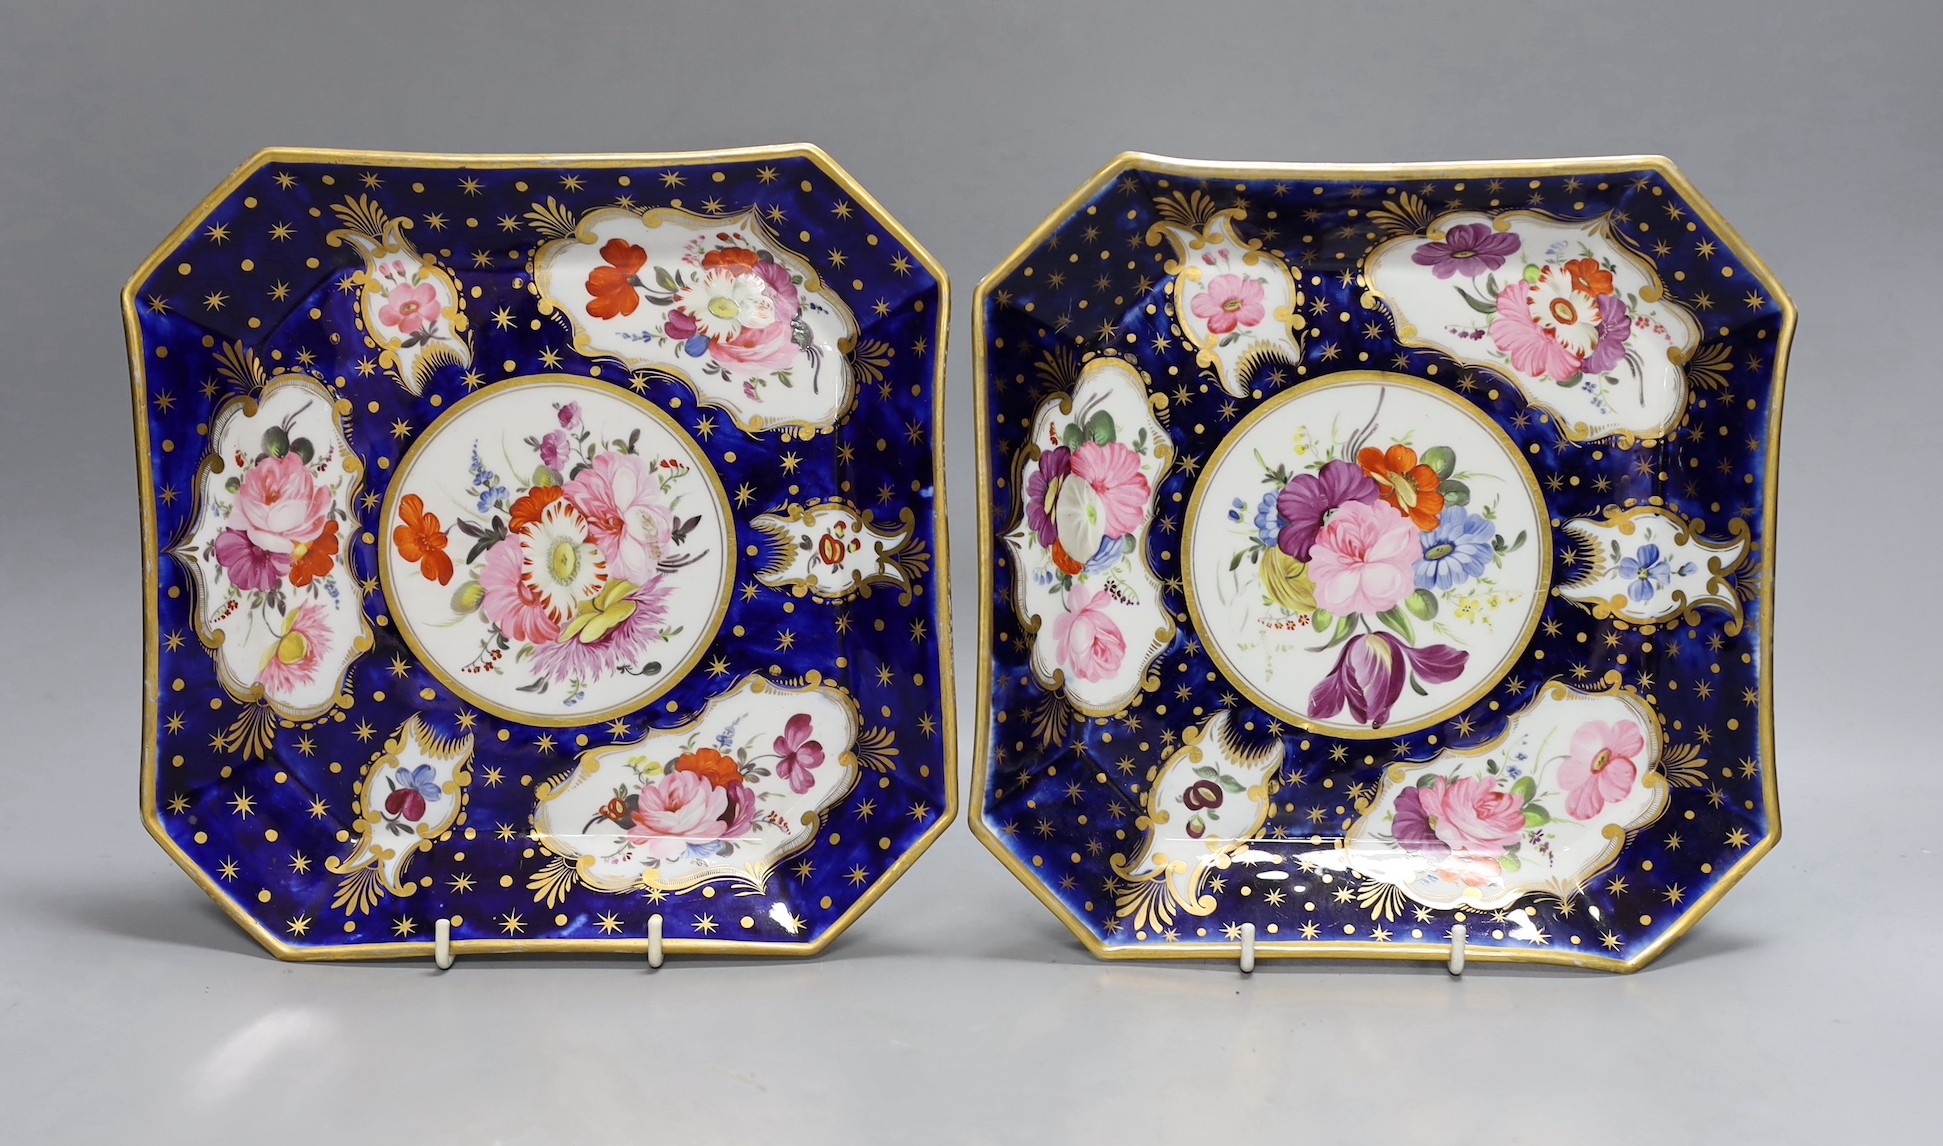 A pair of Coalport ground blue and gilt porcelain square dishes, c.1815-20, with floral panelled decoration. 22cm wide